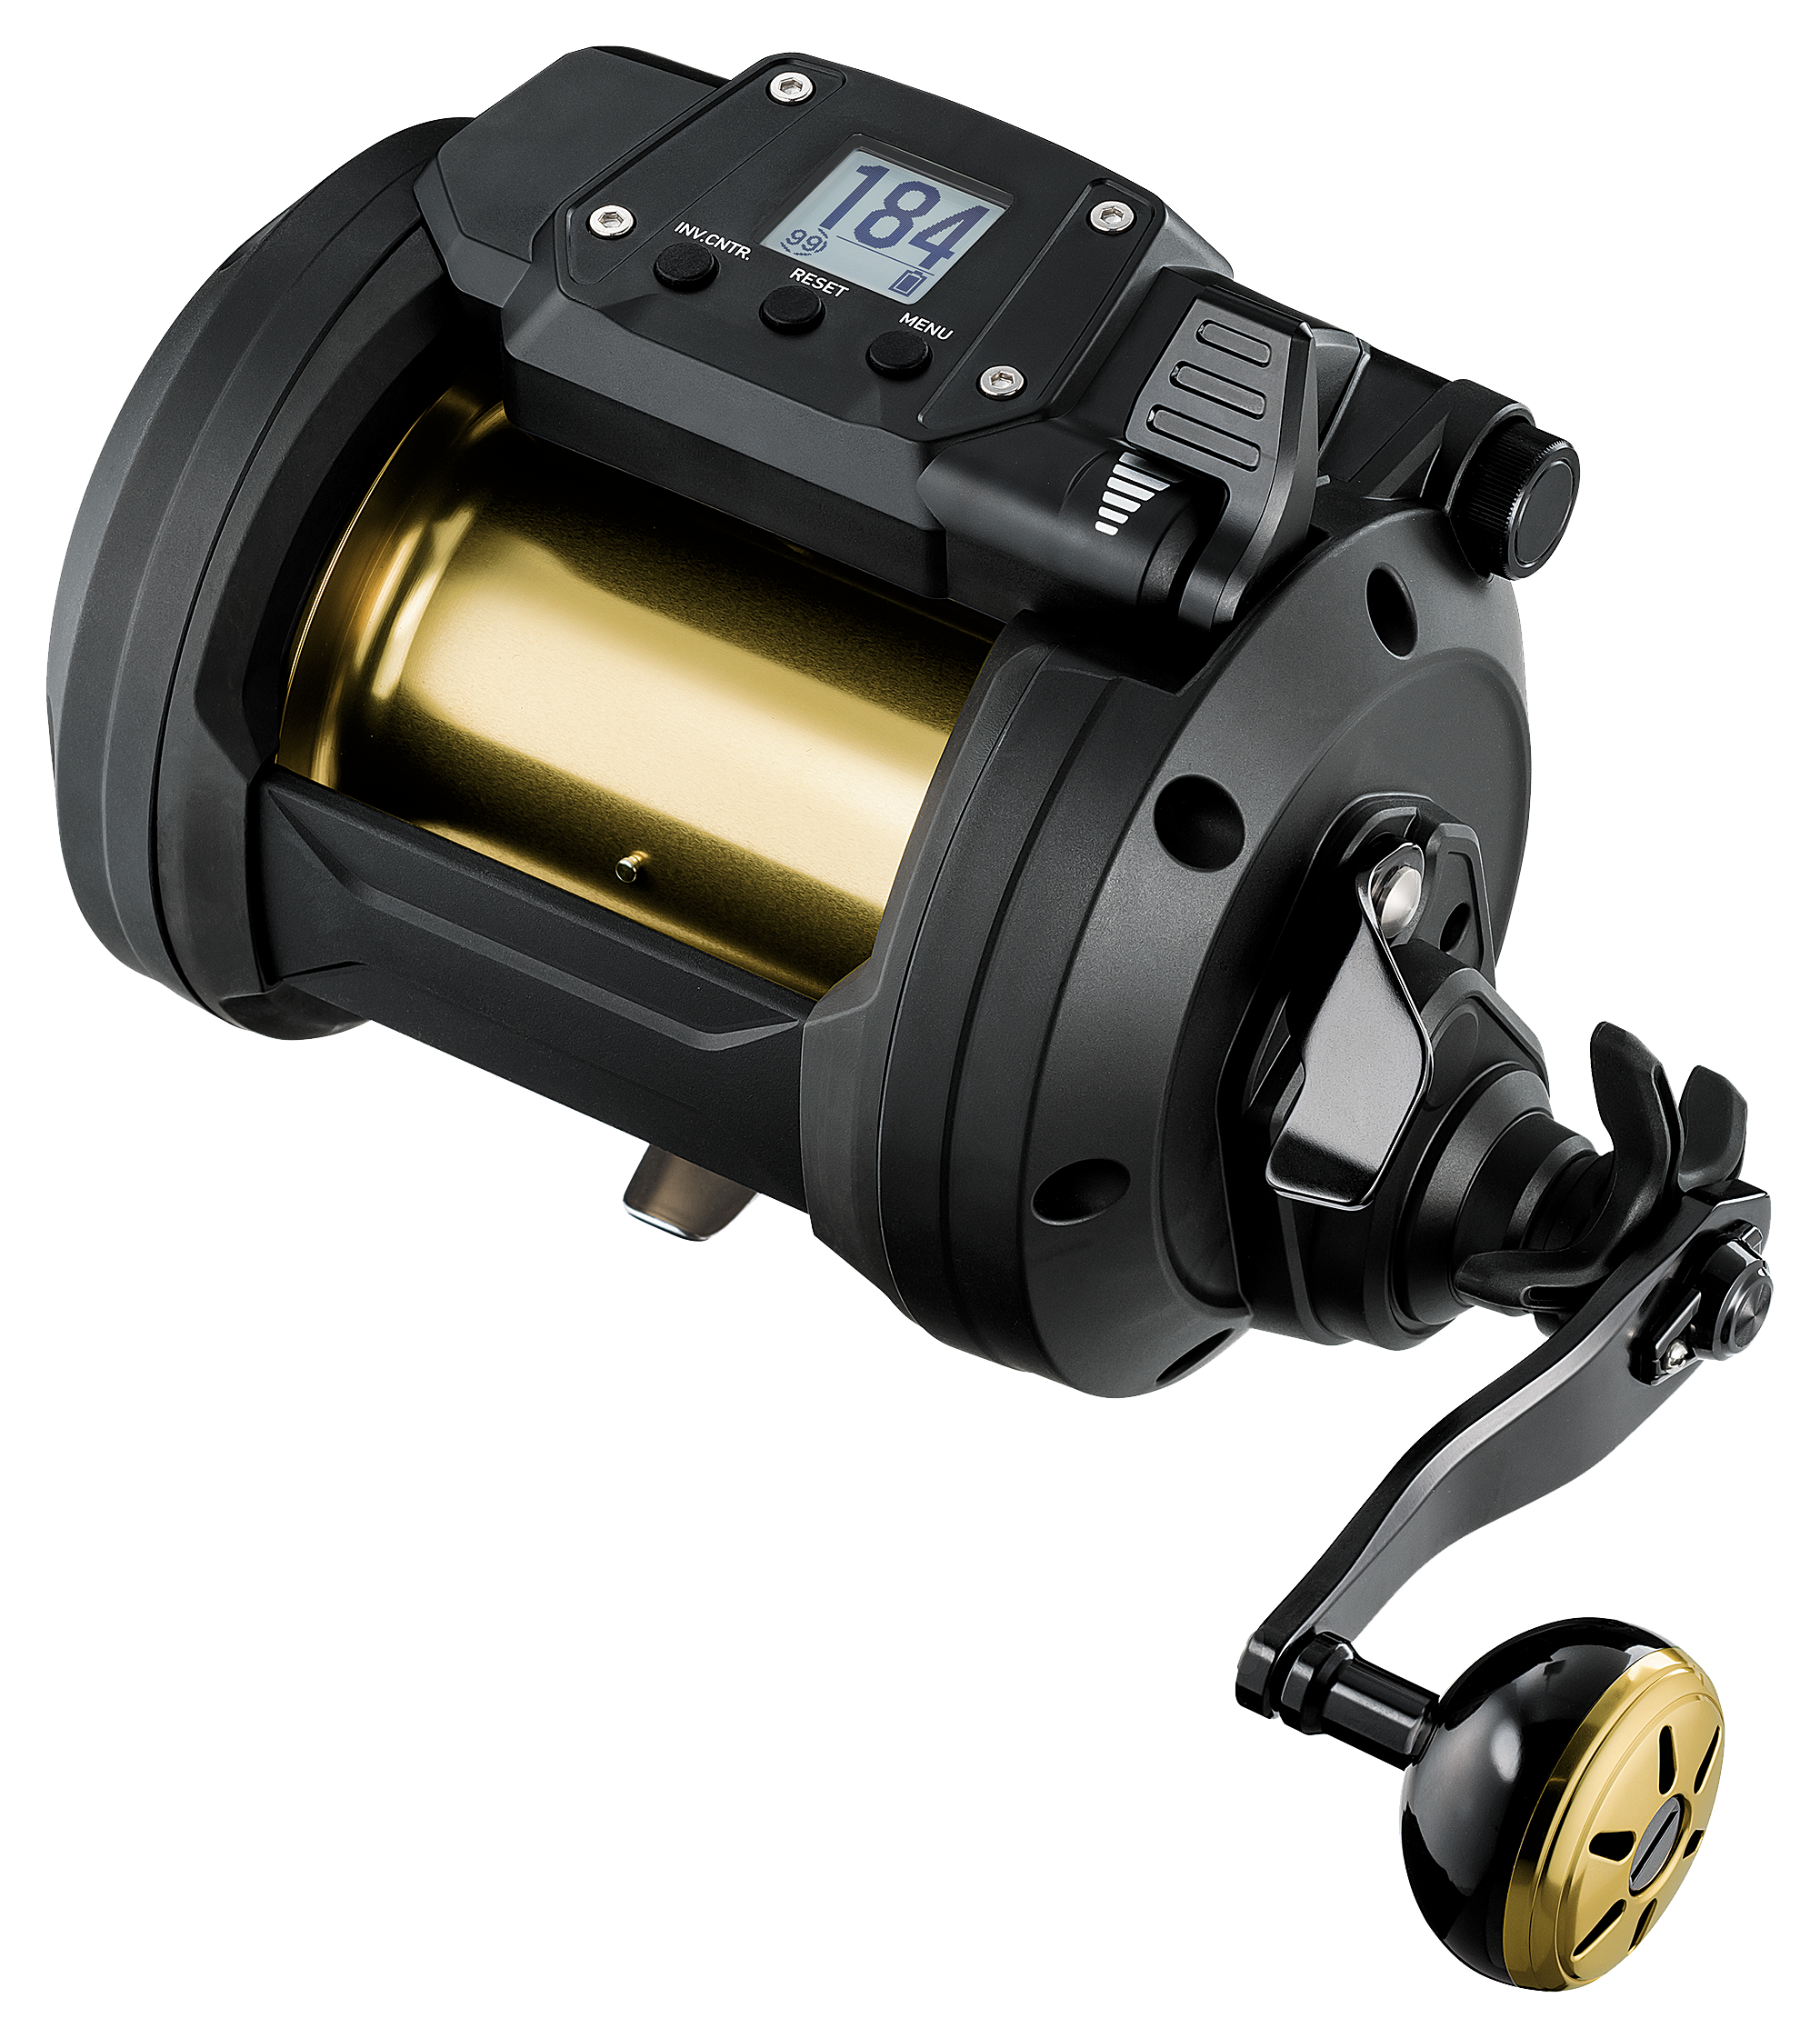 In-Stock: Shimano Beastmaster 9000B - Tackle Direct